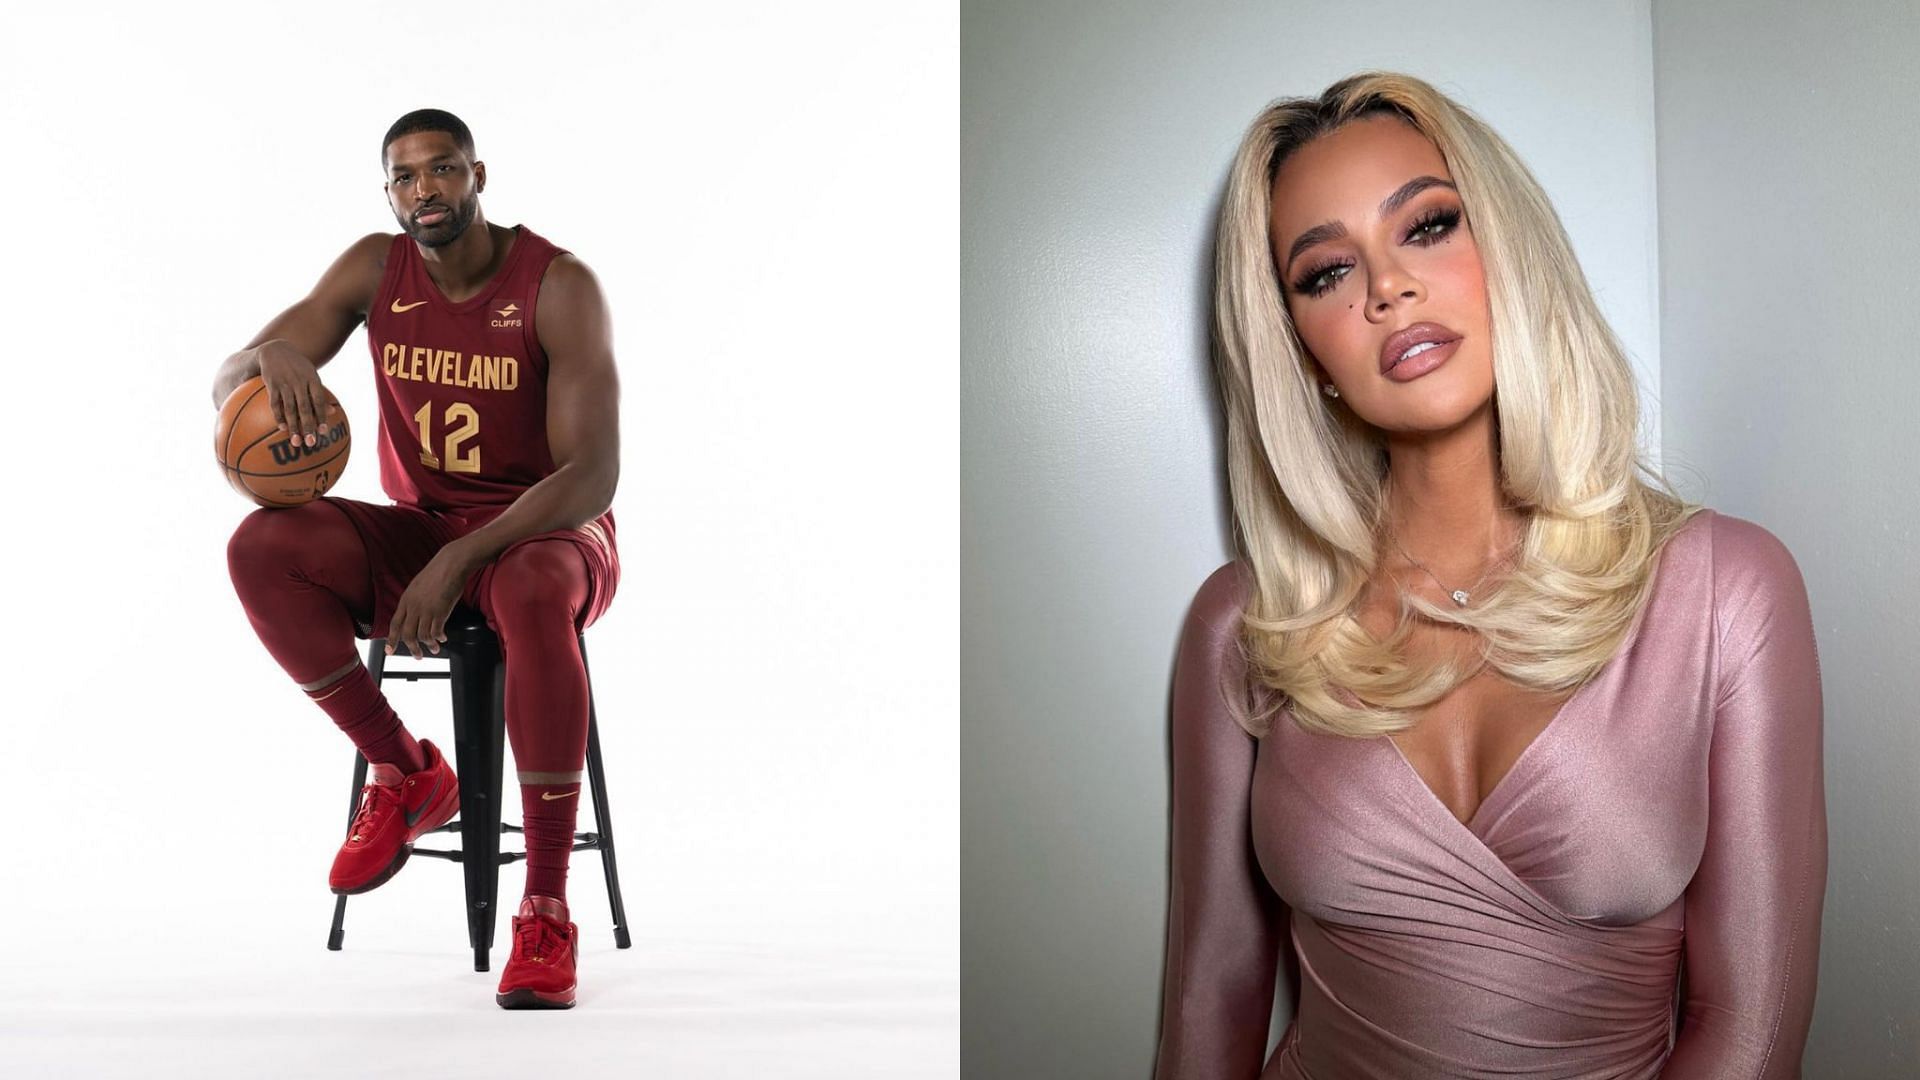 Tristan Thompson and Khloe Kardashian have had a rocky relationship